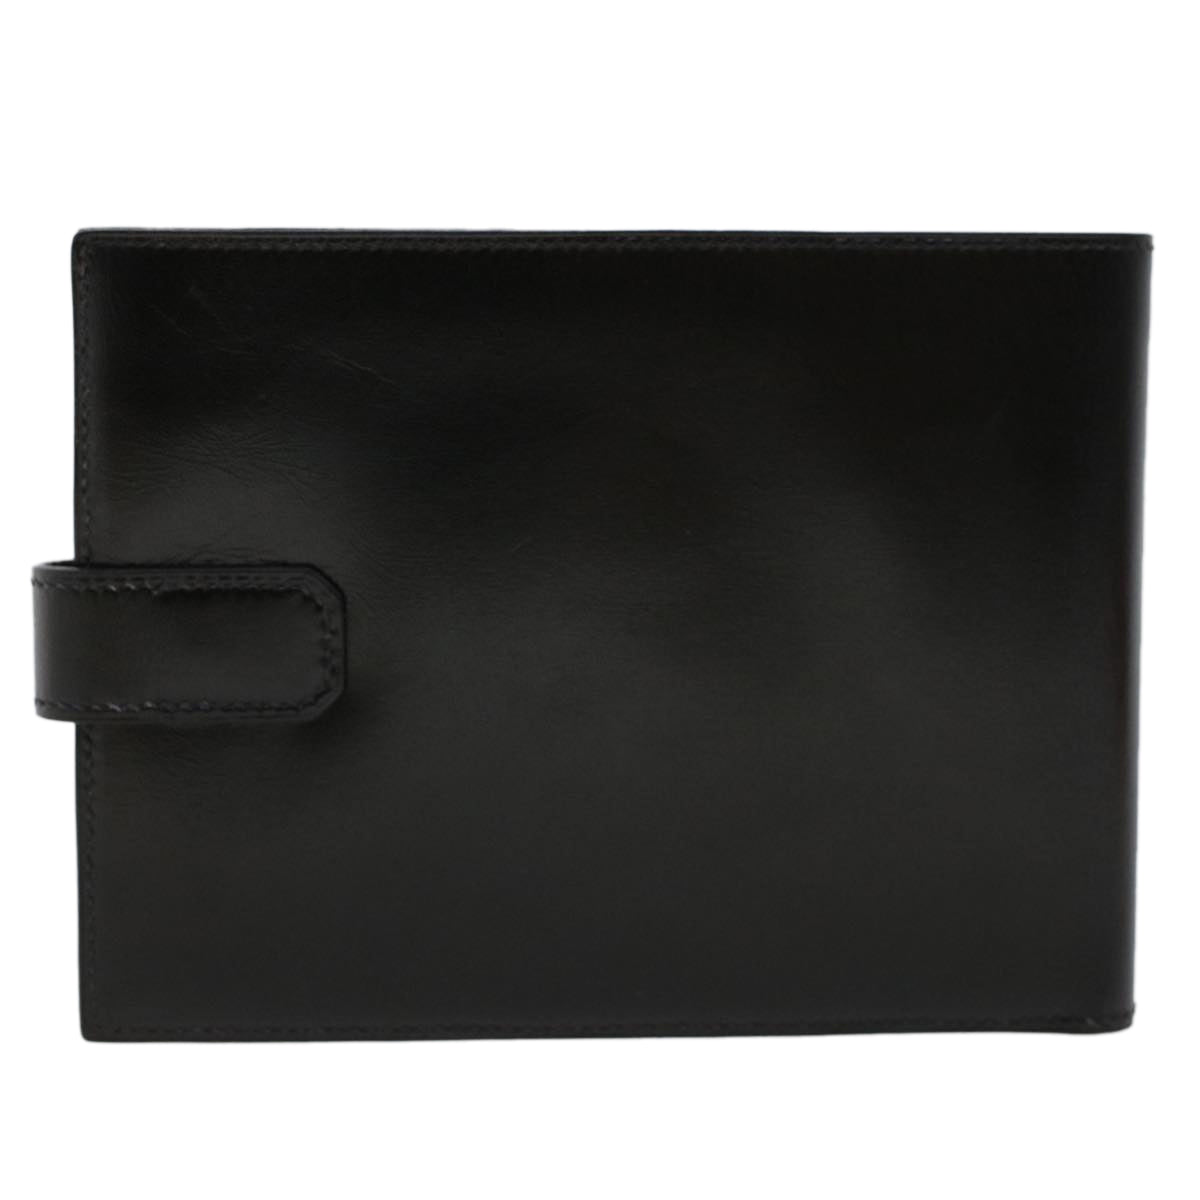 HERMES Wallet Leather Black Auth am4451 - 0